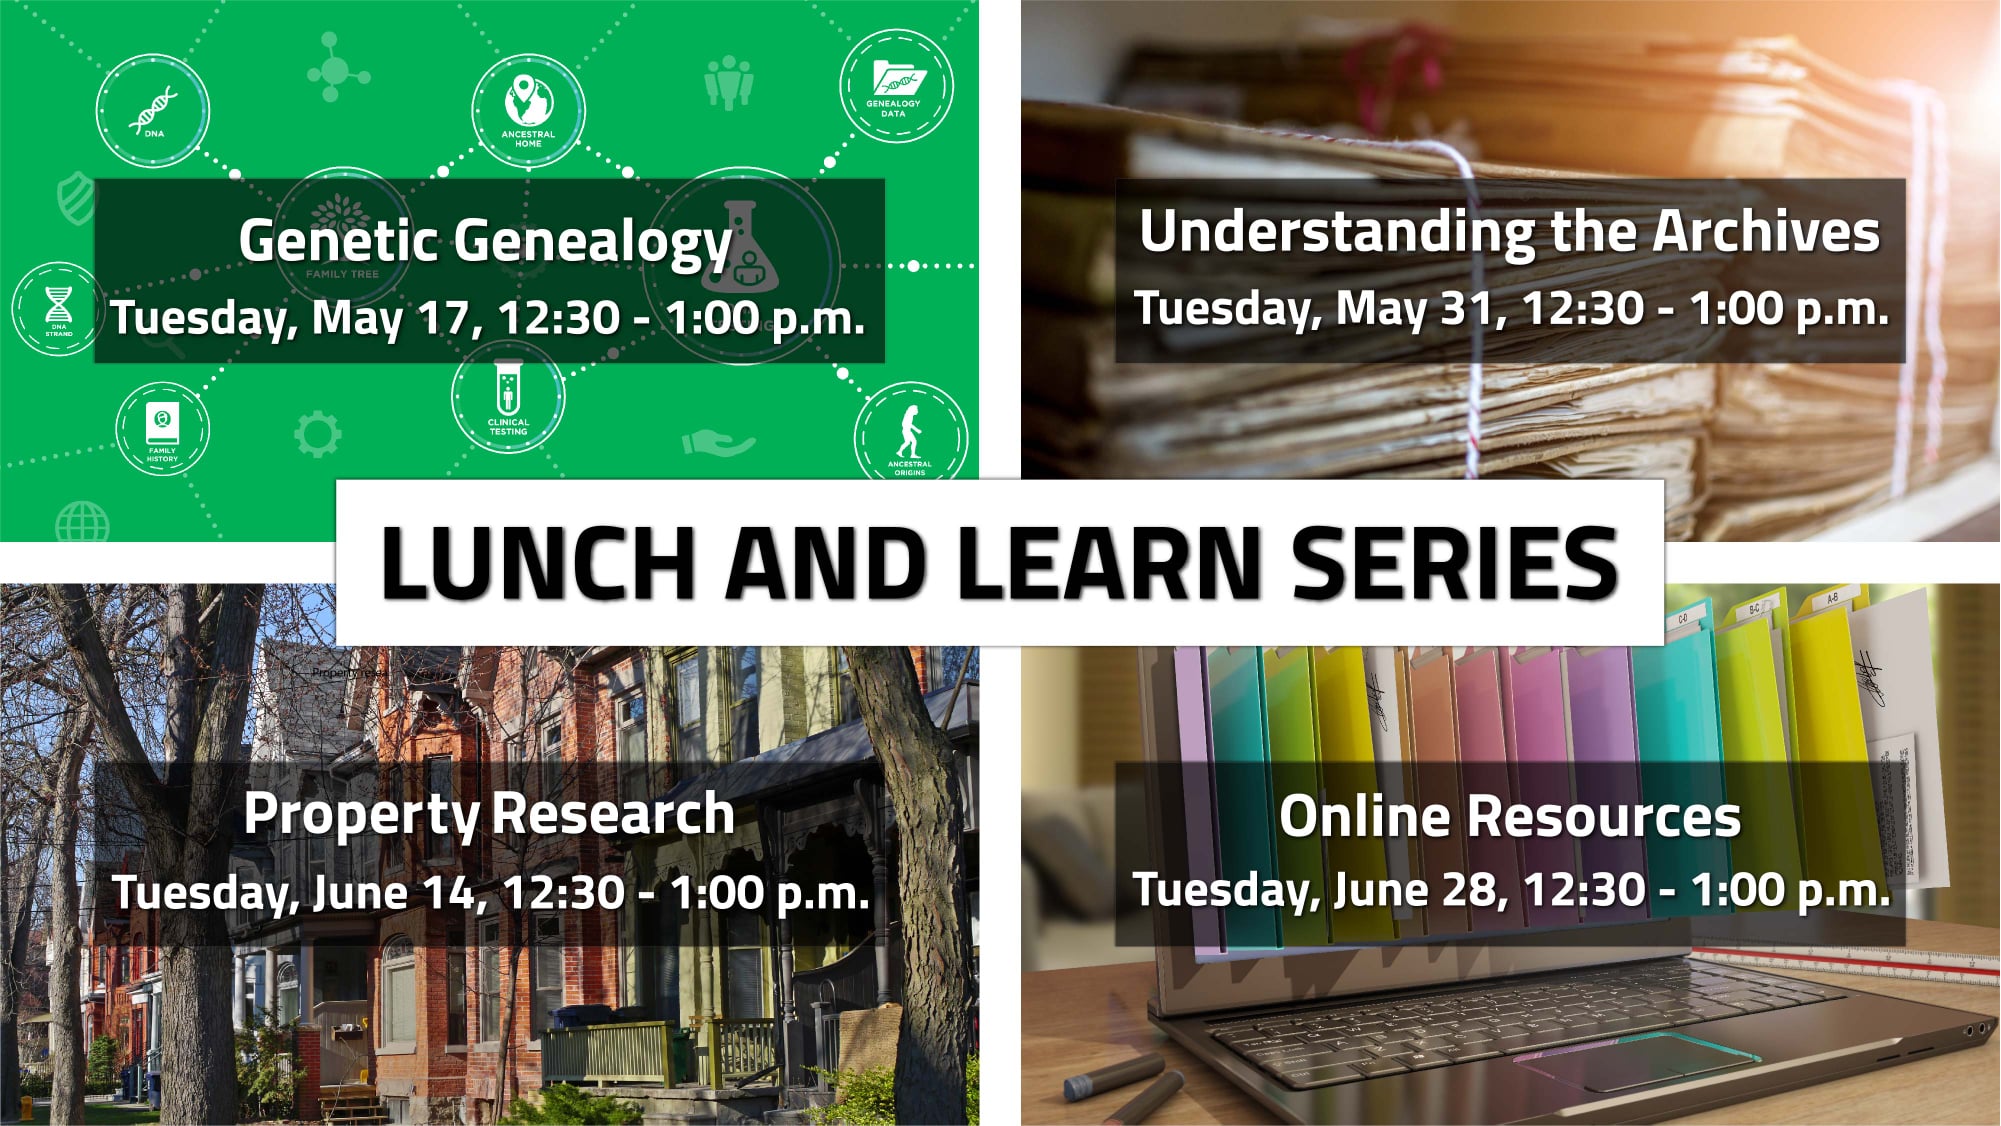 lunch and learn session details